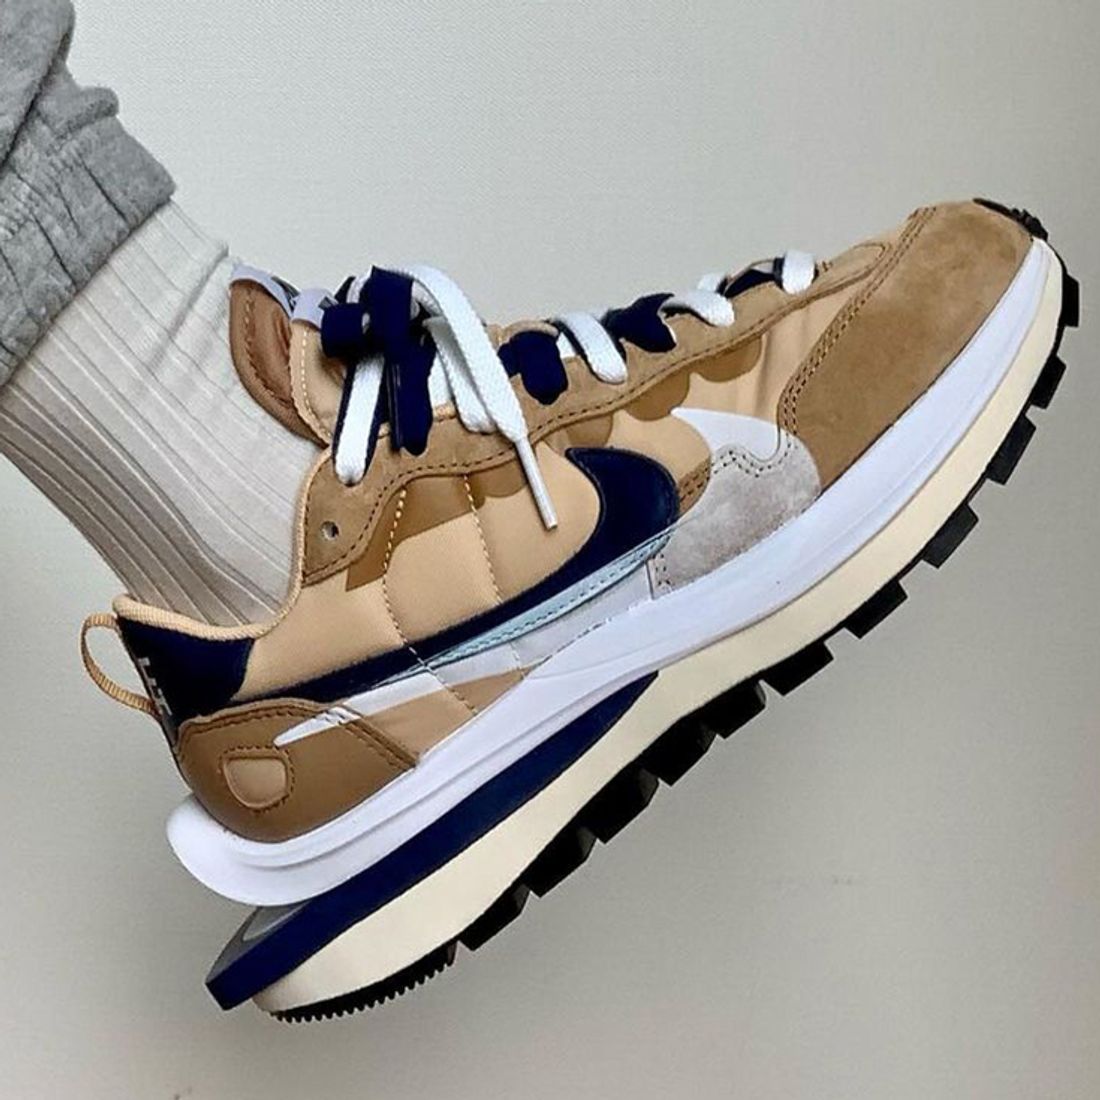 Here's How People are Styling the sacai x Nike VaporWaffle - Sneaker Freaker